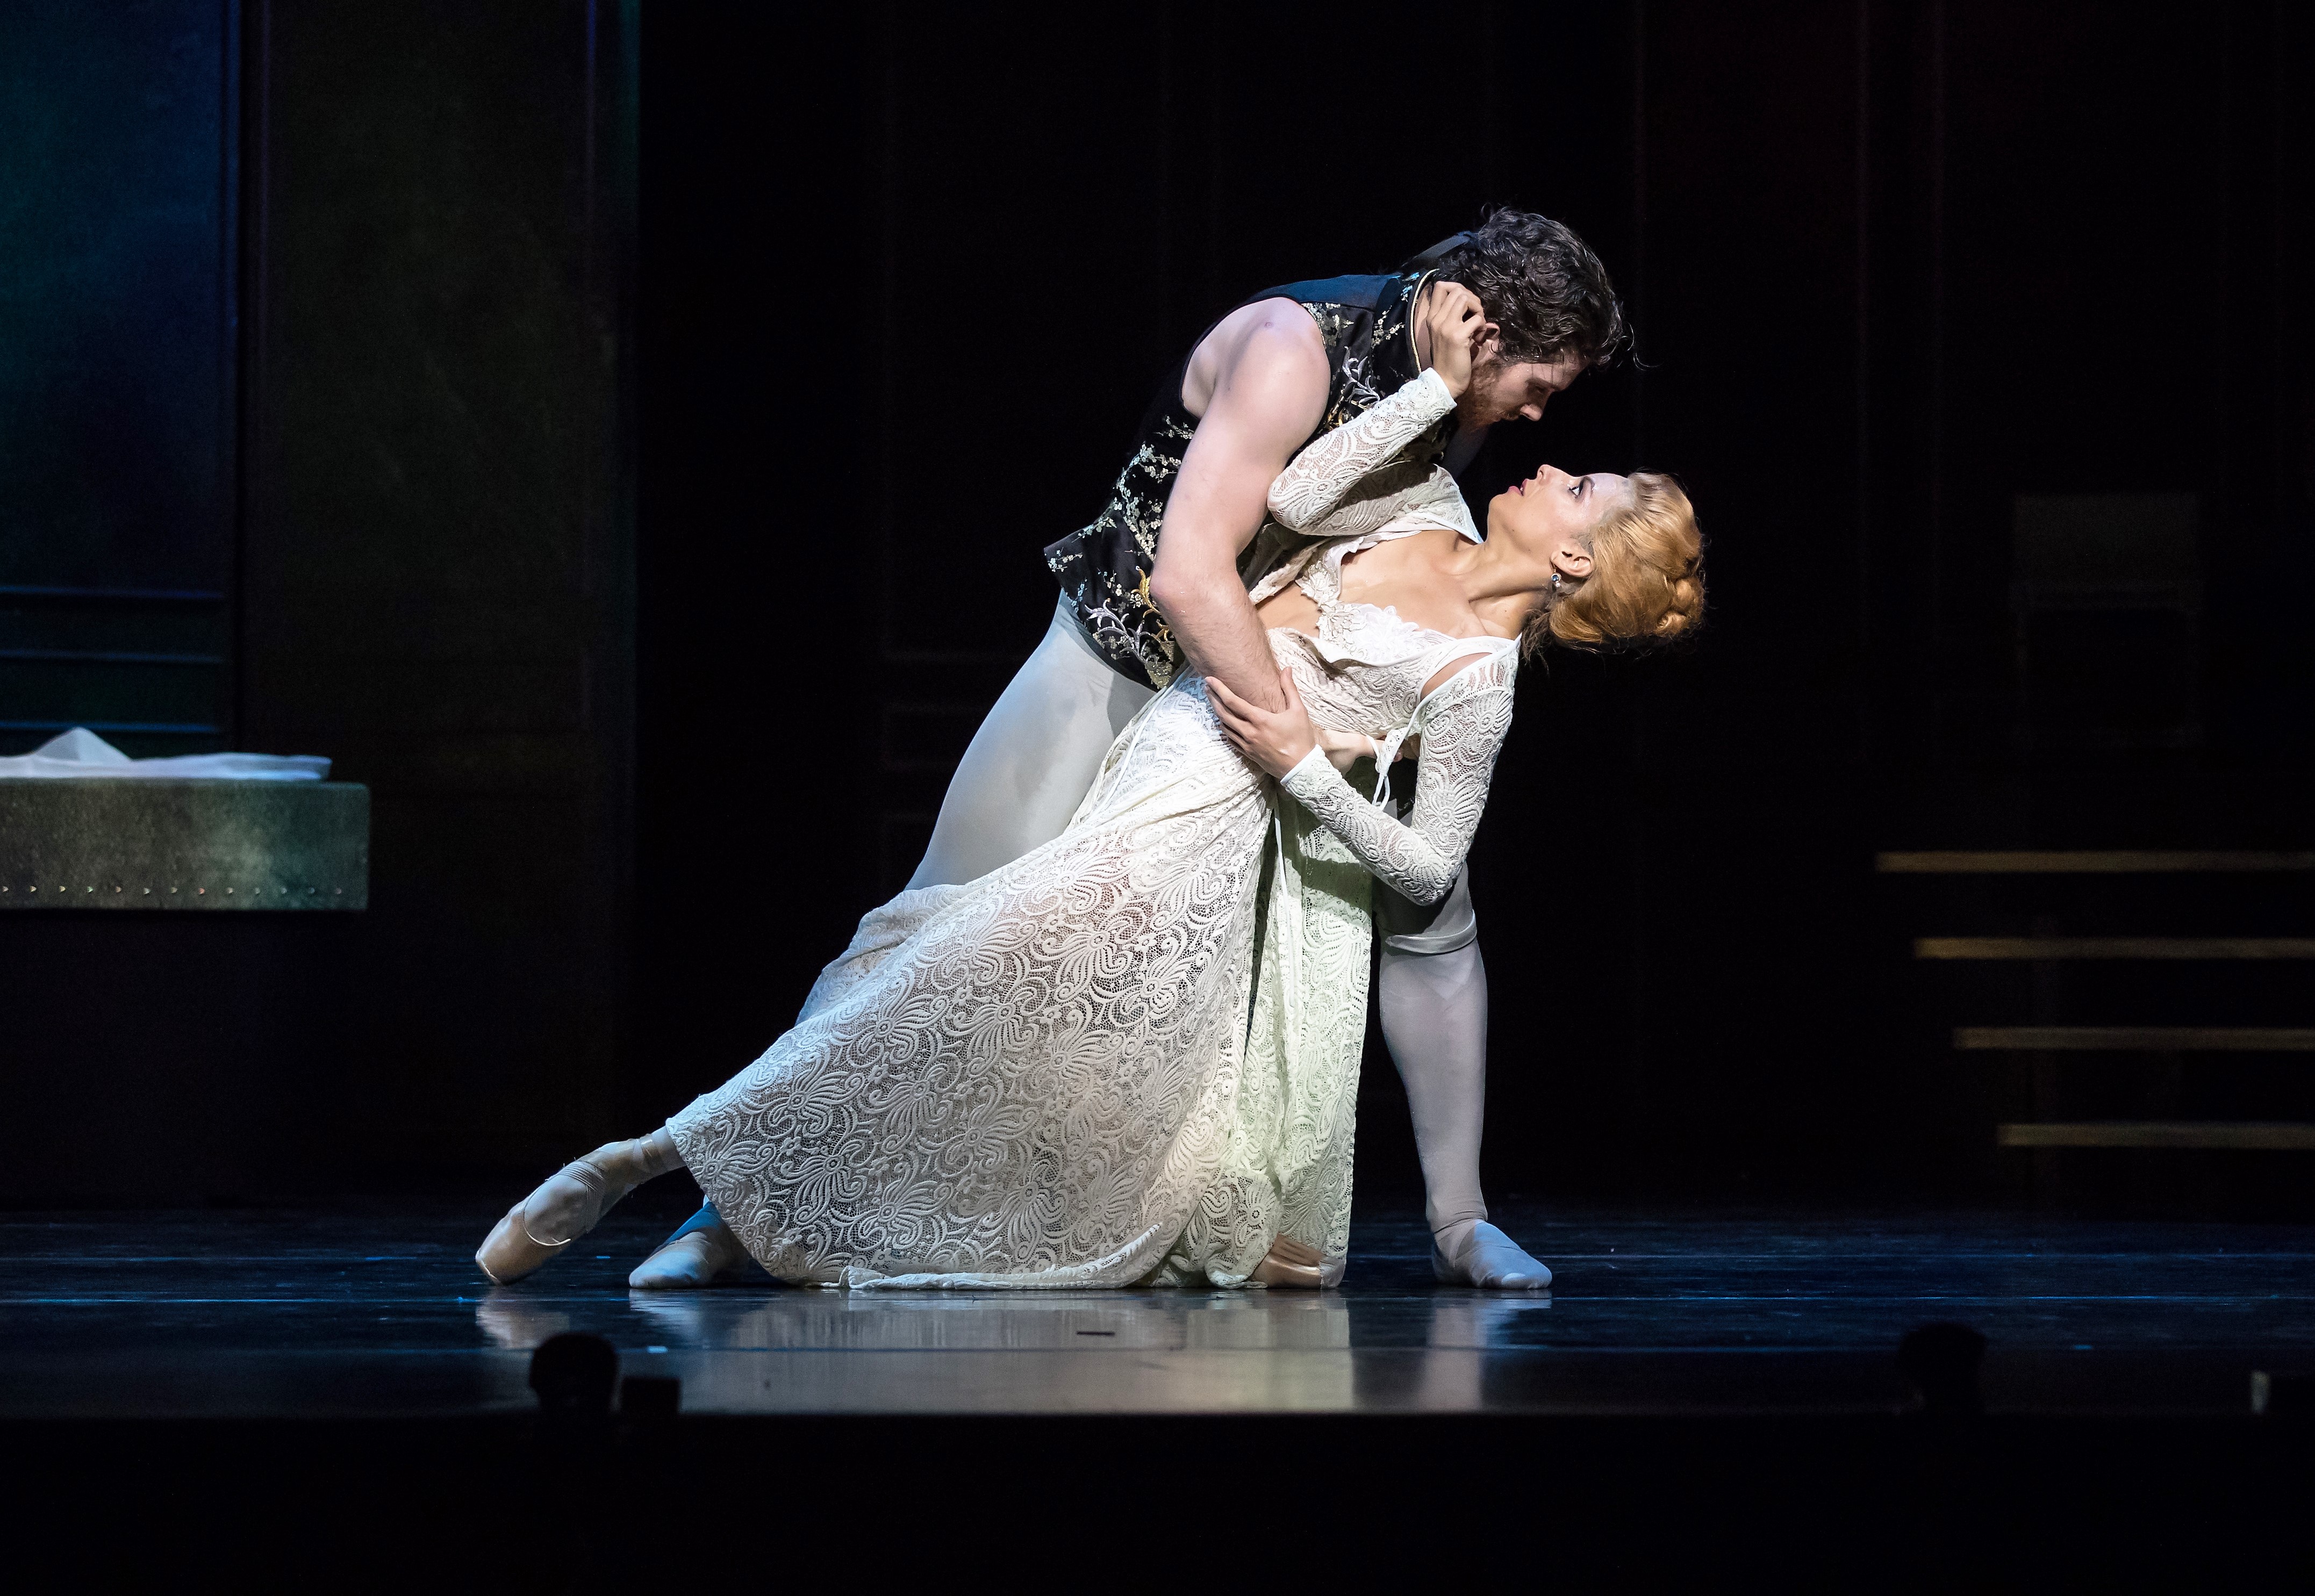 Lucy Green as Cecile and Alexander Idaszak as Valmont in 'Dangerous Liaisons'. Queensland Ballet, 2019. Photo David Kelly